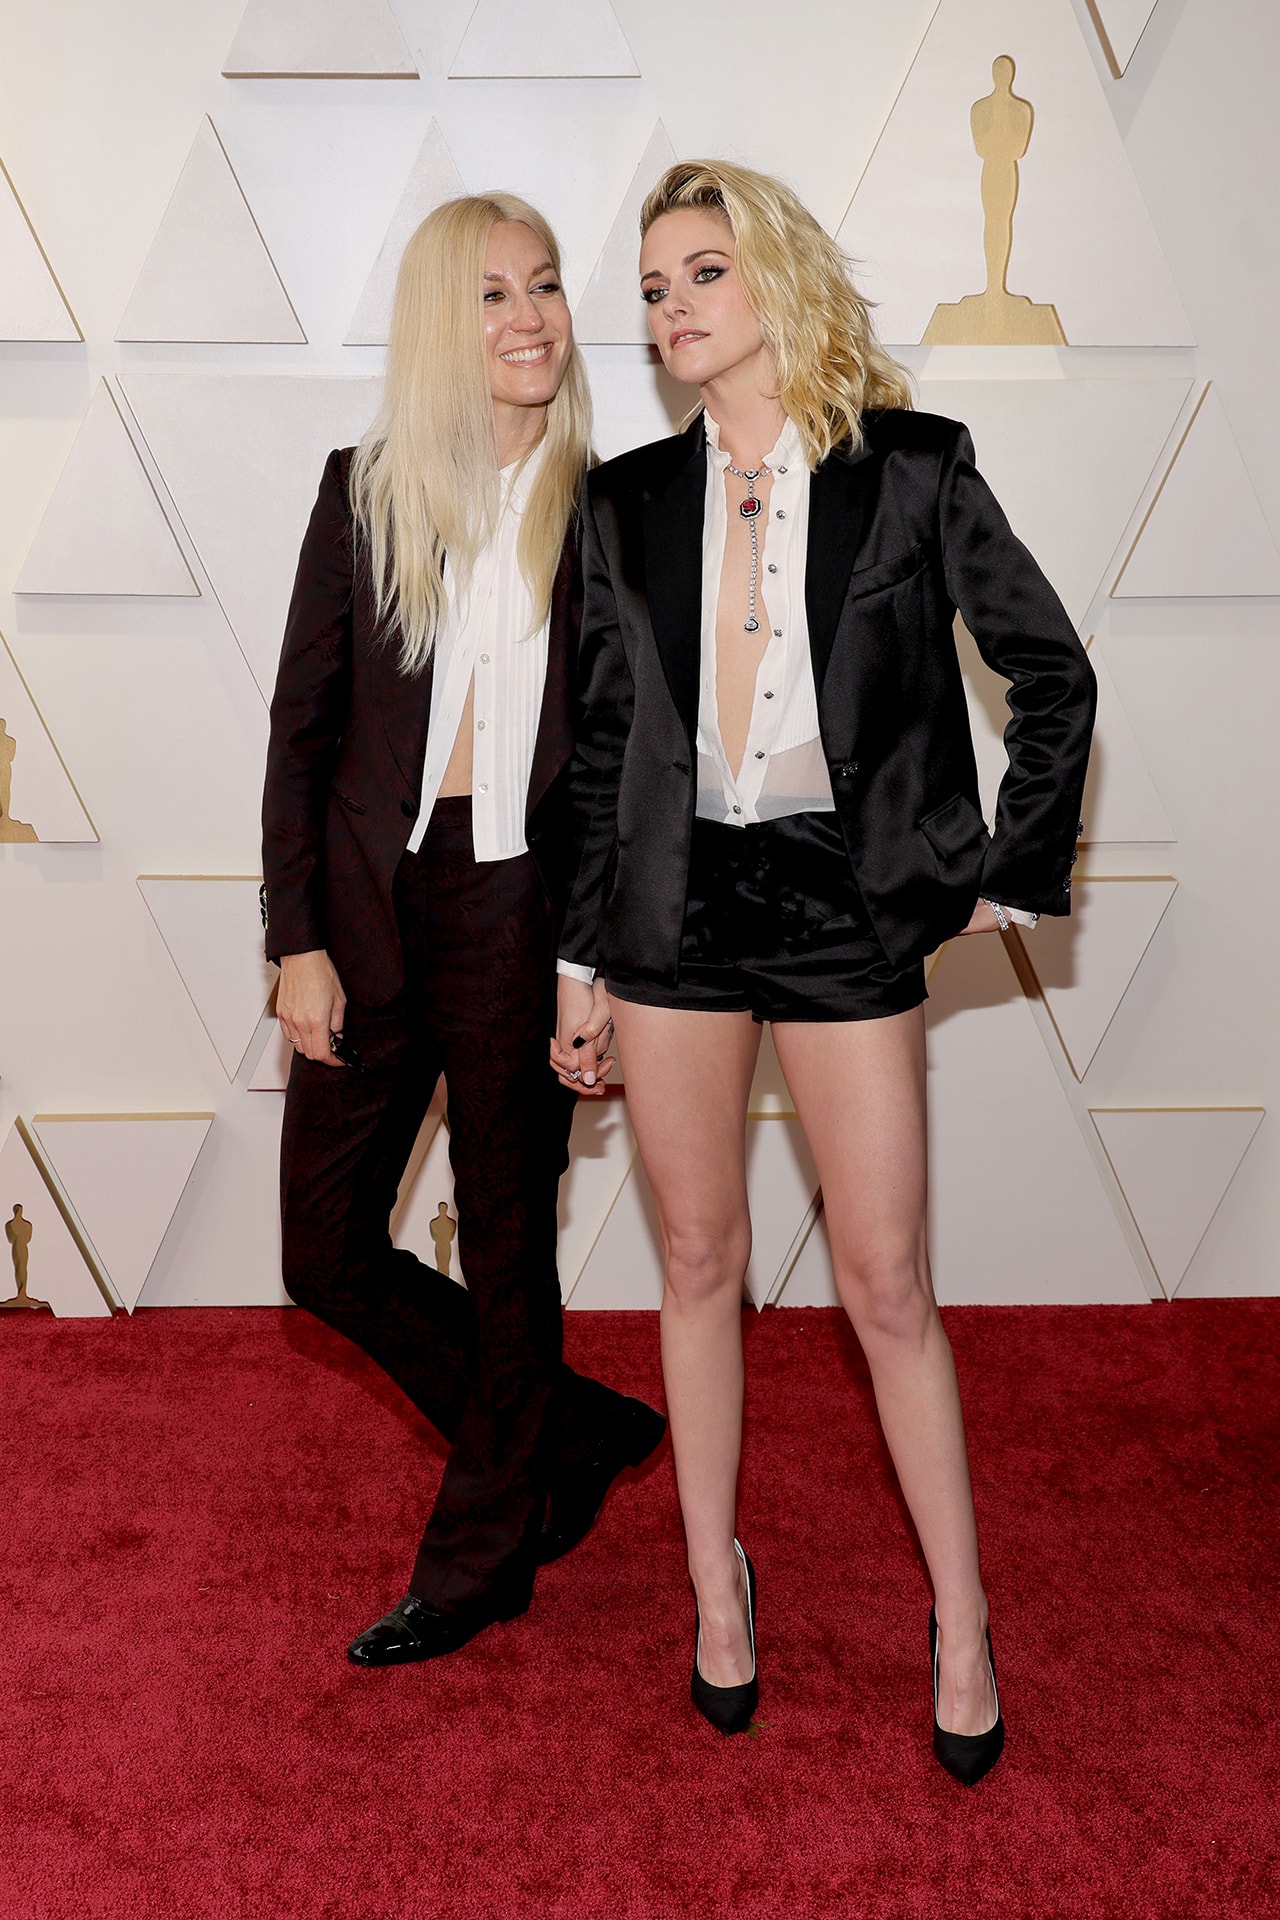 Kristen Stewart and Fiancee in custom looks at the Academy Awards Chanel Shorts 